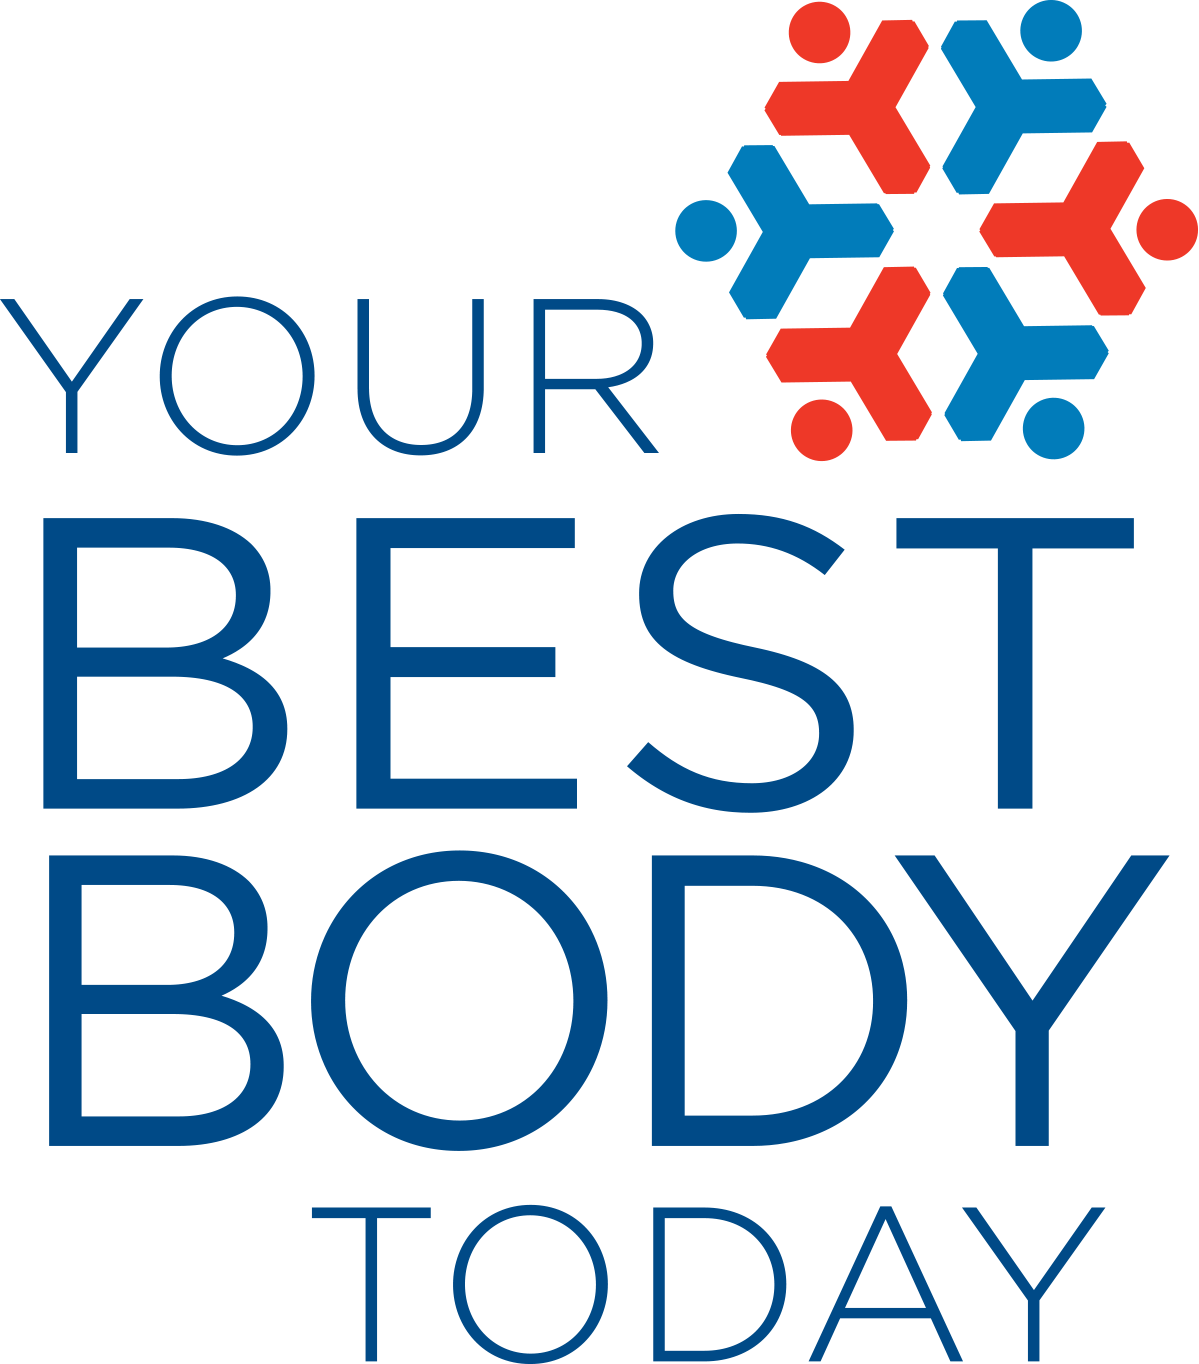 Your Best Body Today